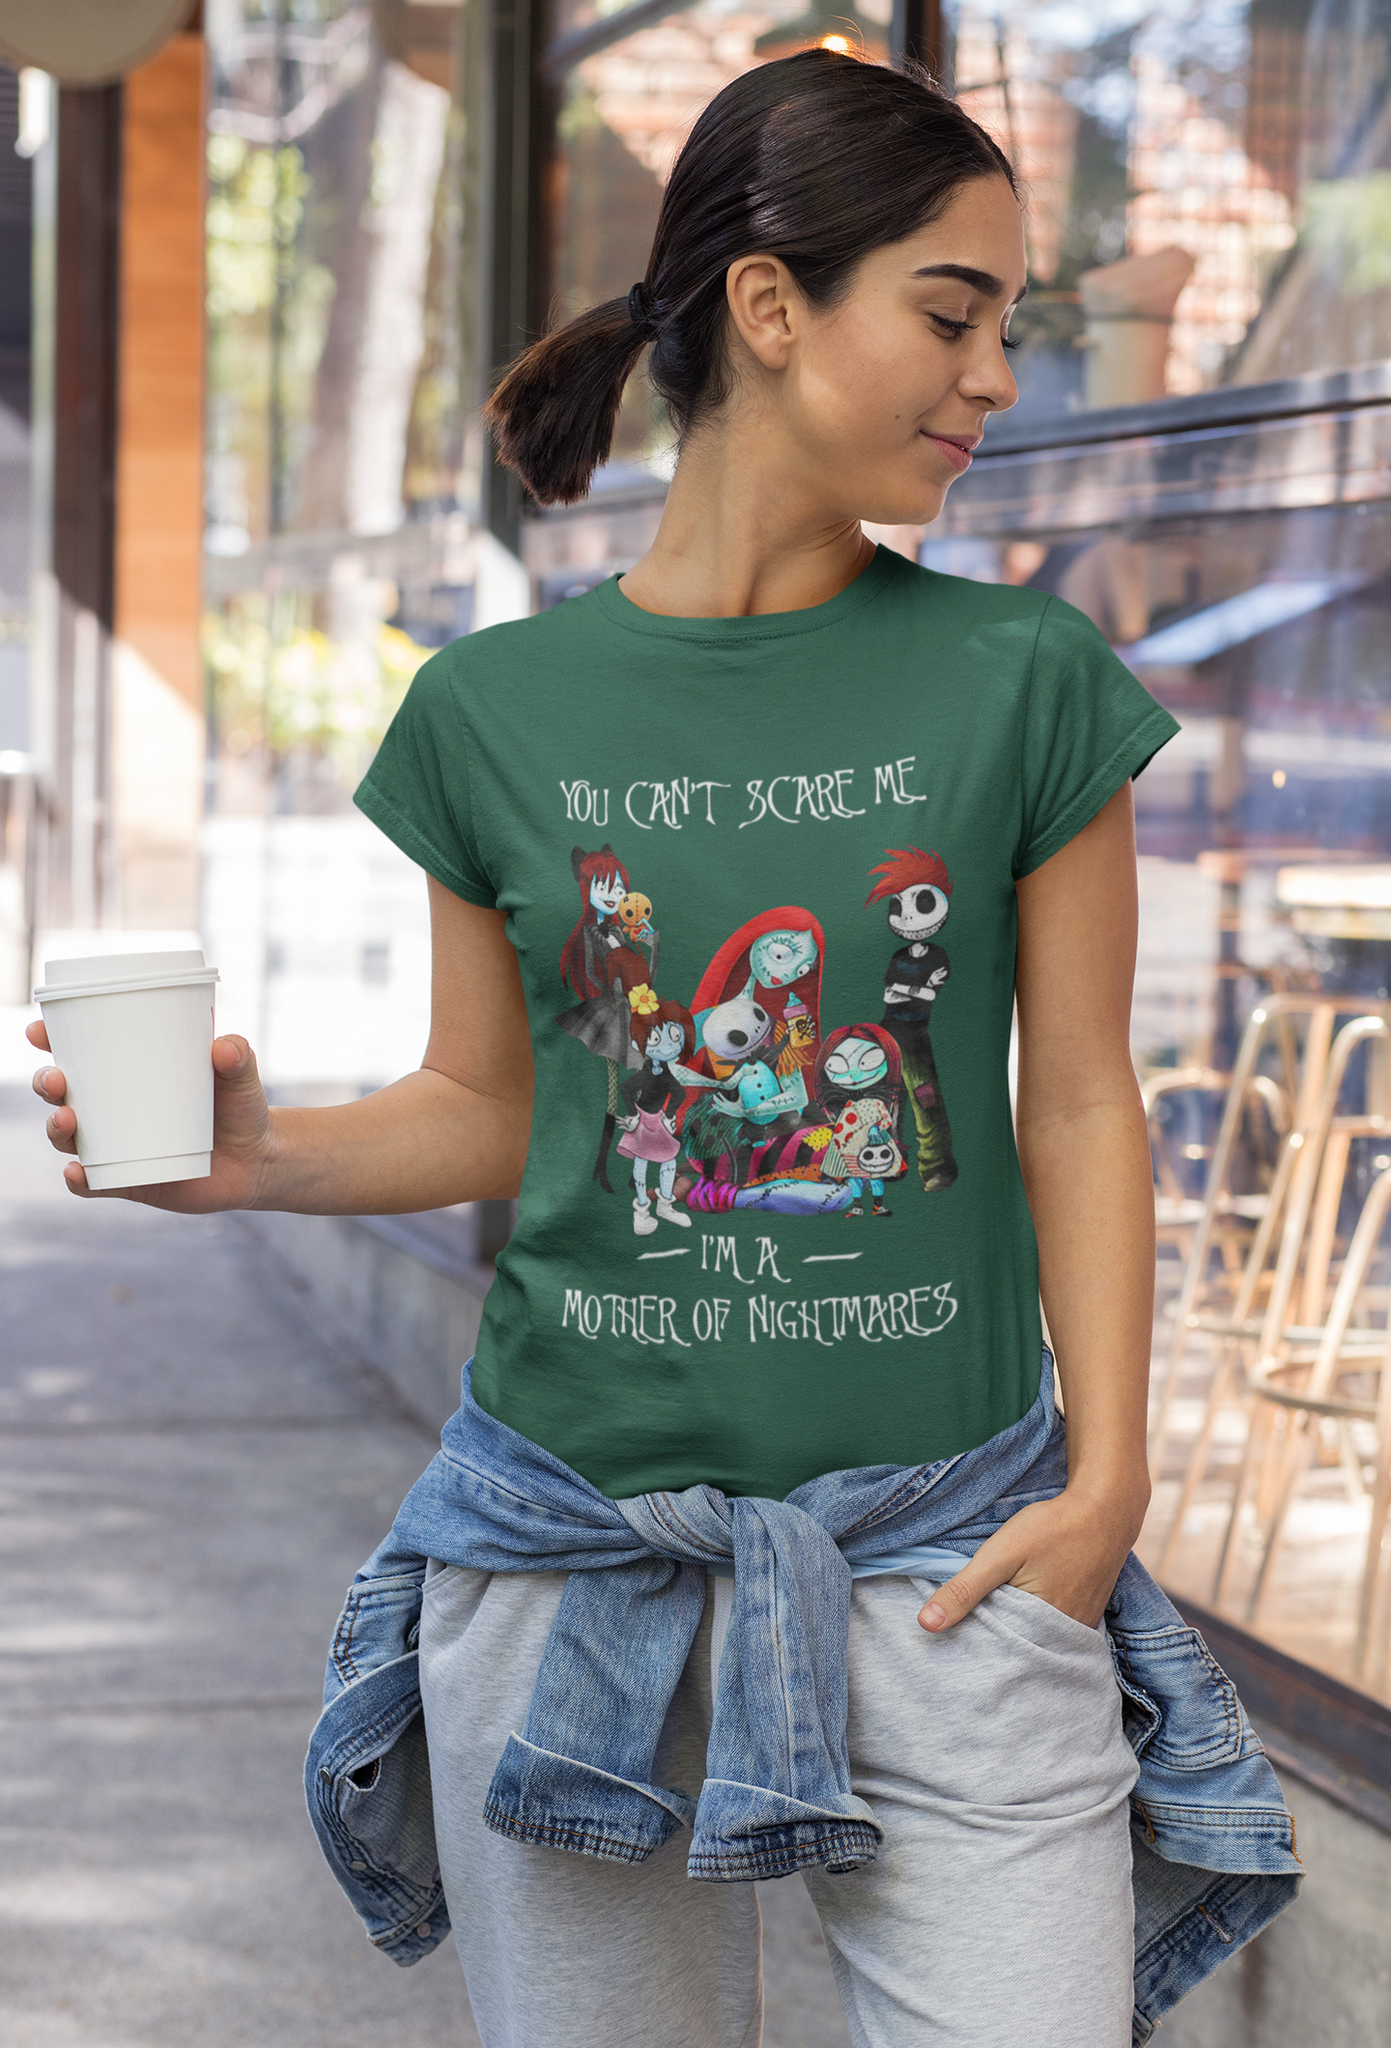 Nightmare Before Christmas T Shirt, Im A Mother Of Nightmares Tshirt, Sally And Children T Shirt, Mothers Day Gifts